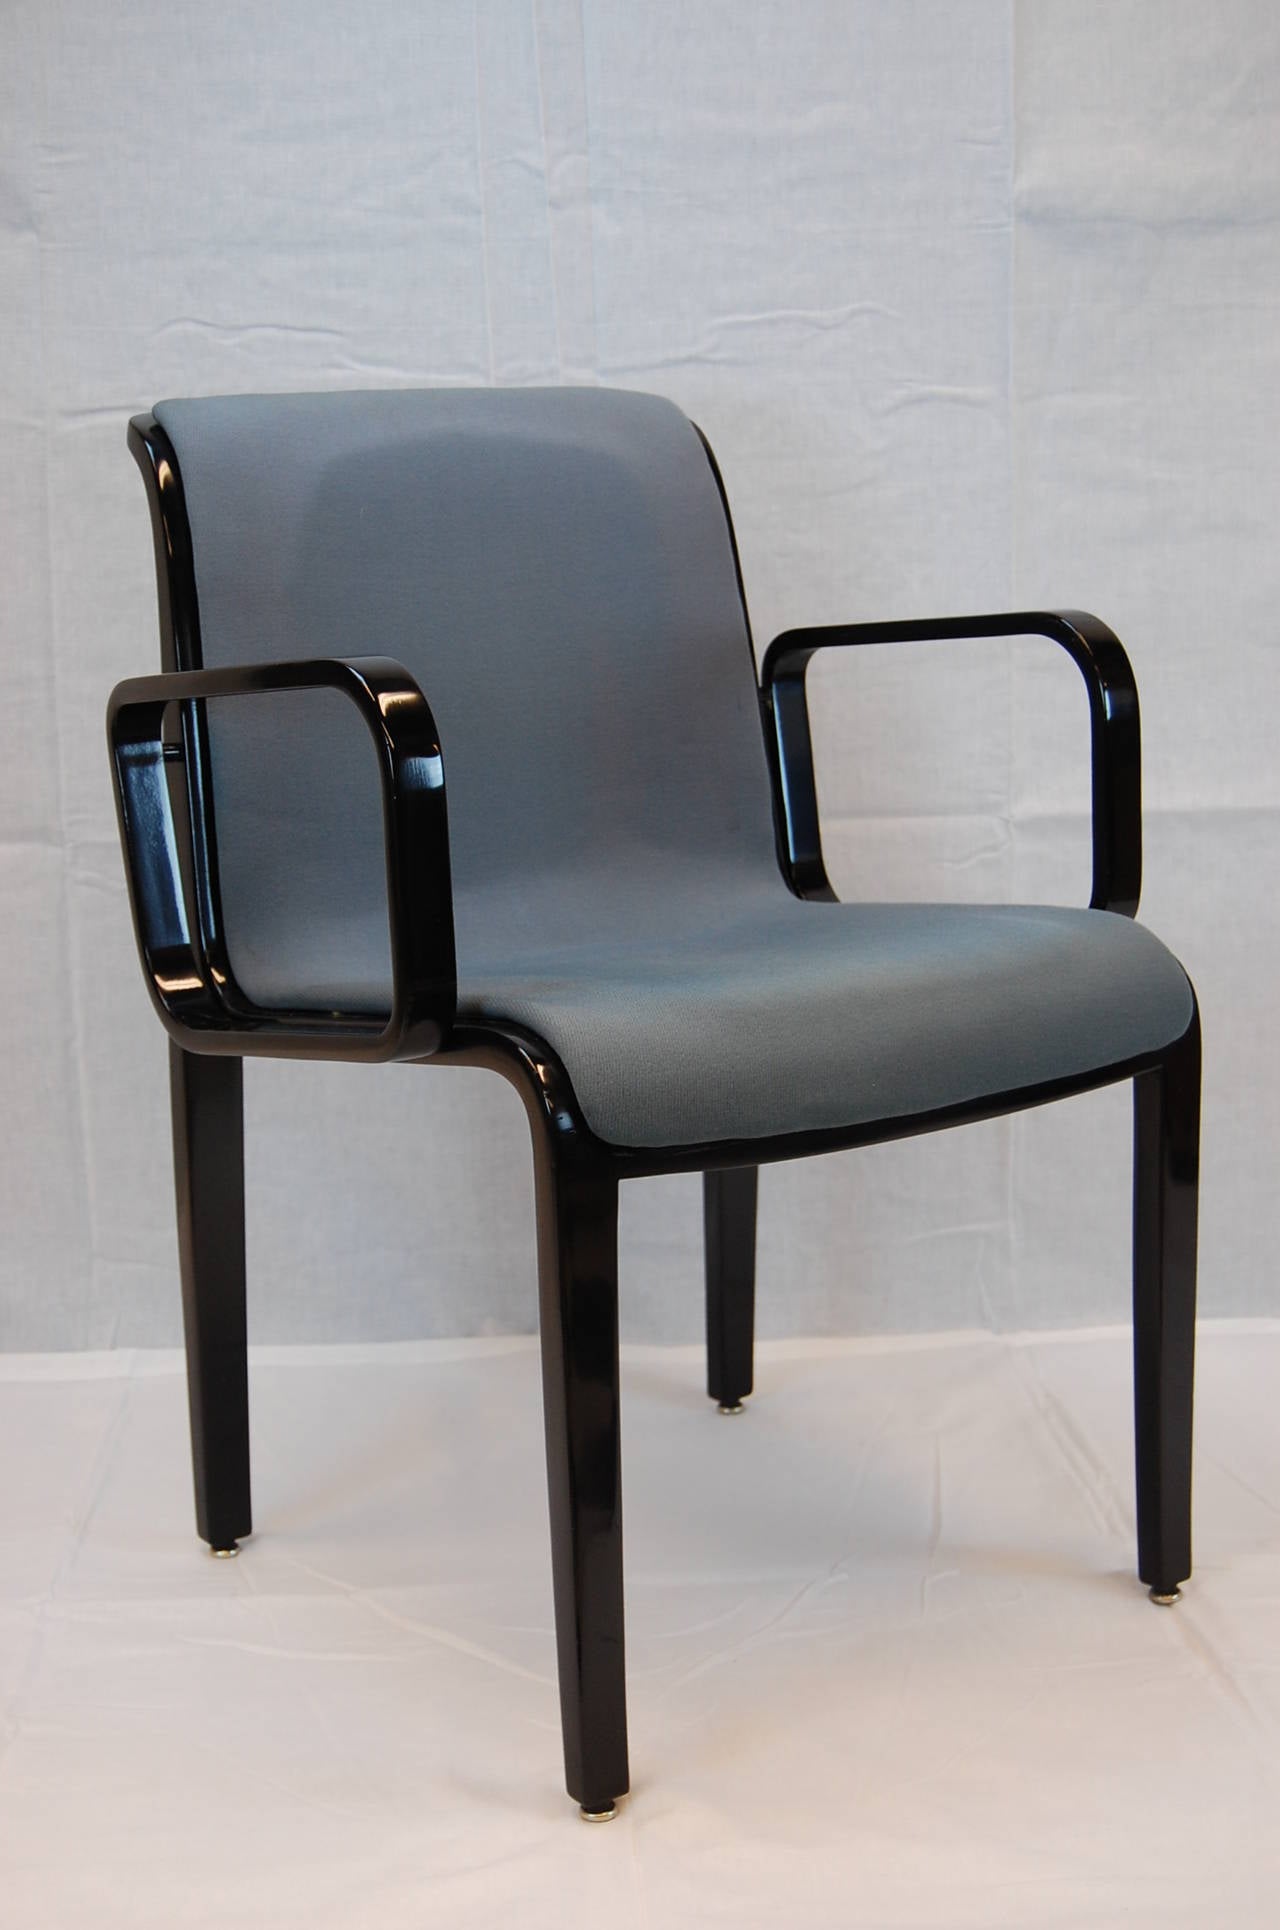 Black lacquered bentwood armchair by Bill Stephens for Knoll, still upholstered in its original blue-gray fabric. Original tag is stamped either 1990 or 1996.